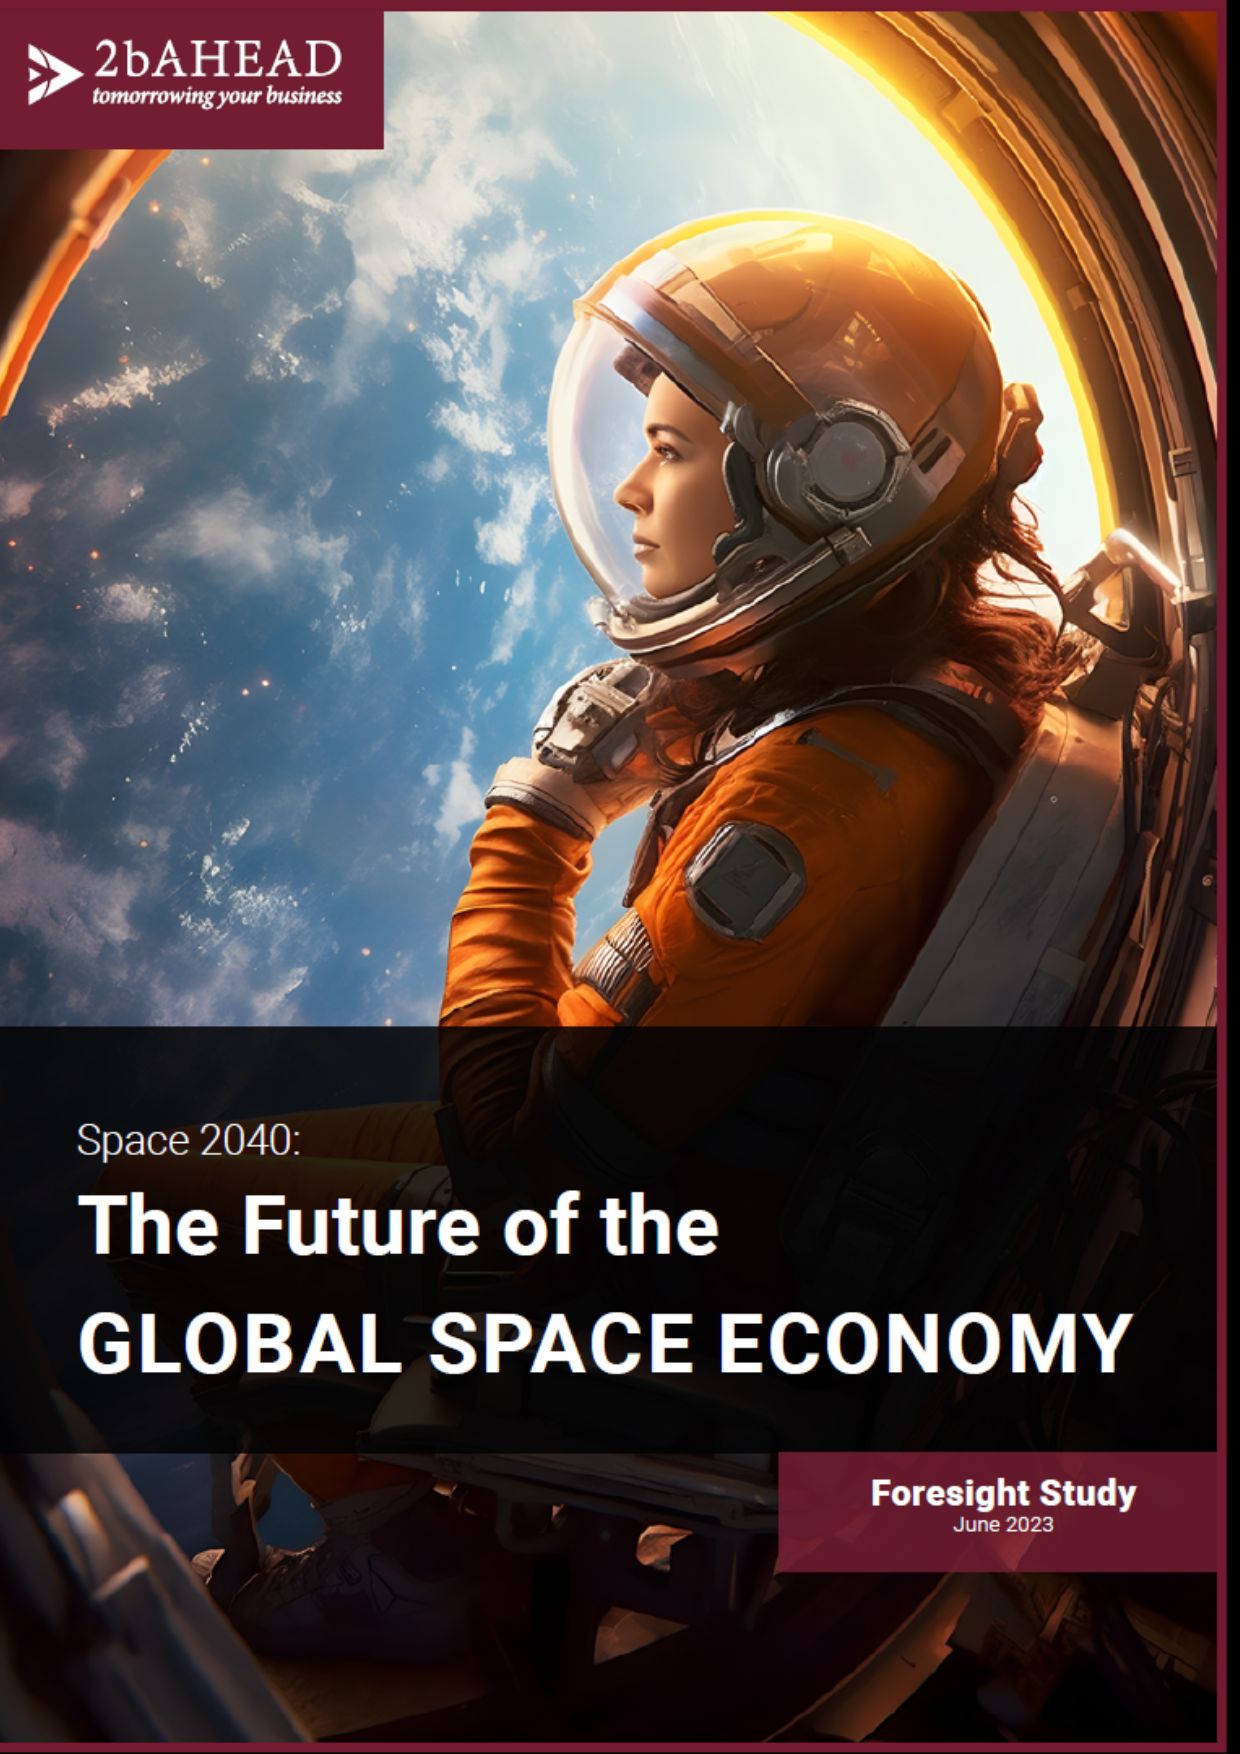 Space 2040 The Future of Global Space Economy